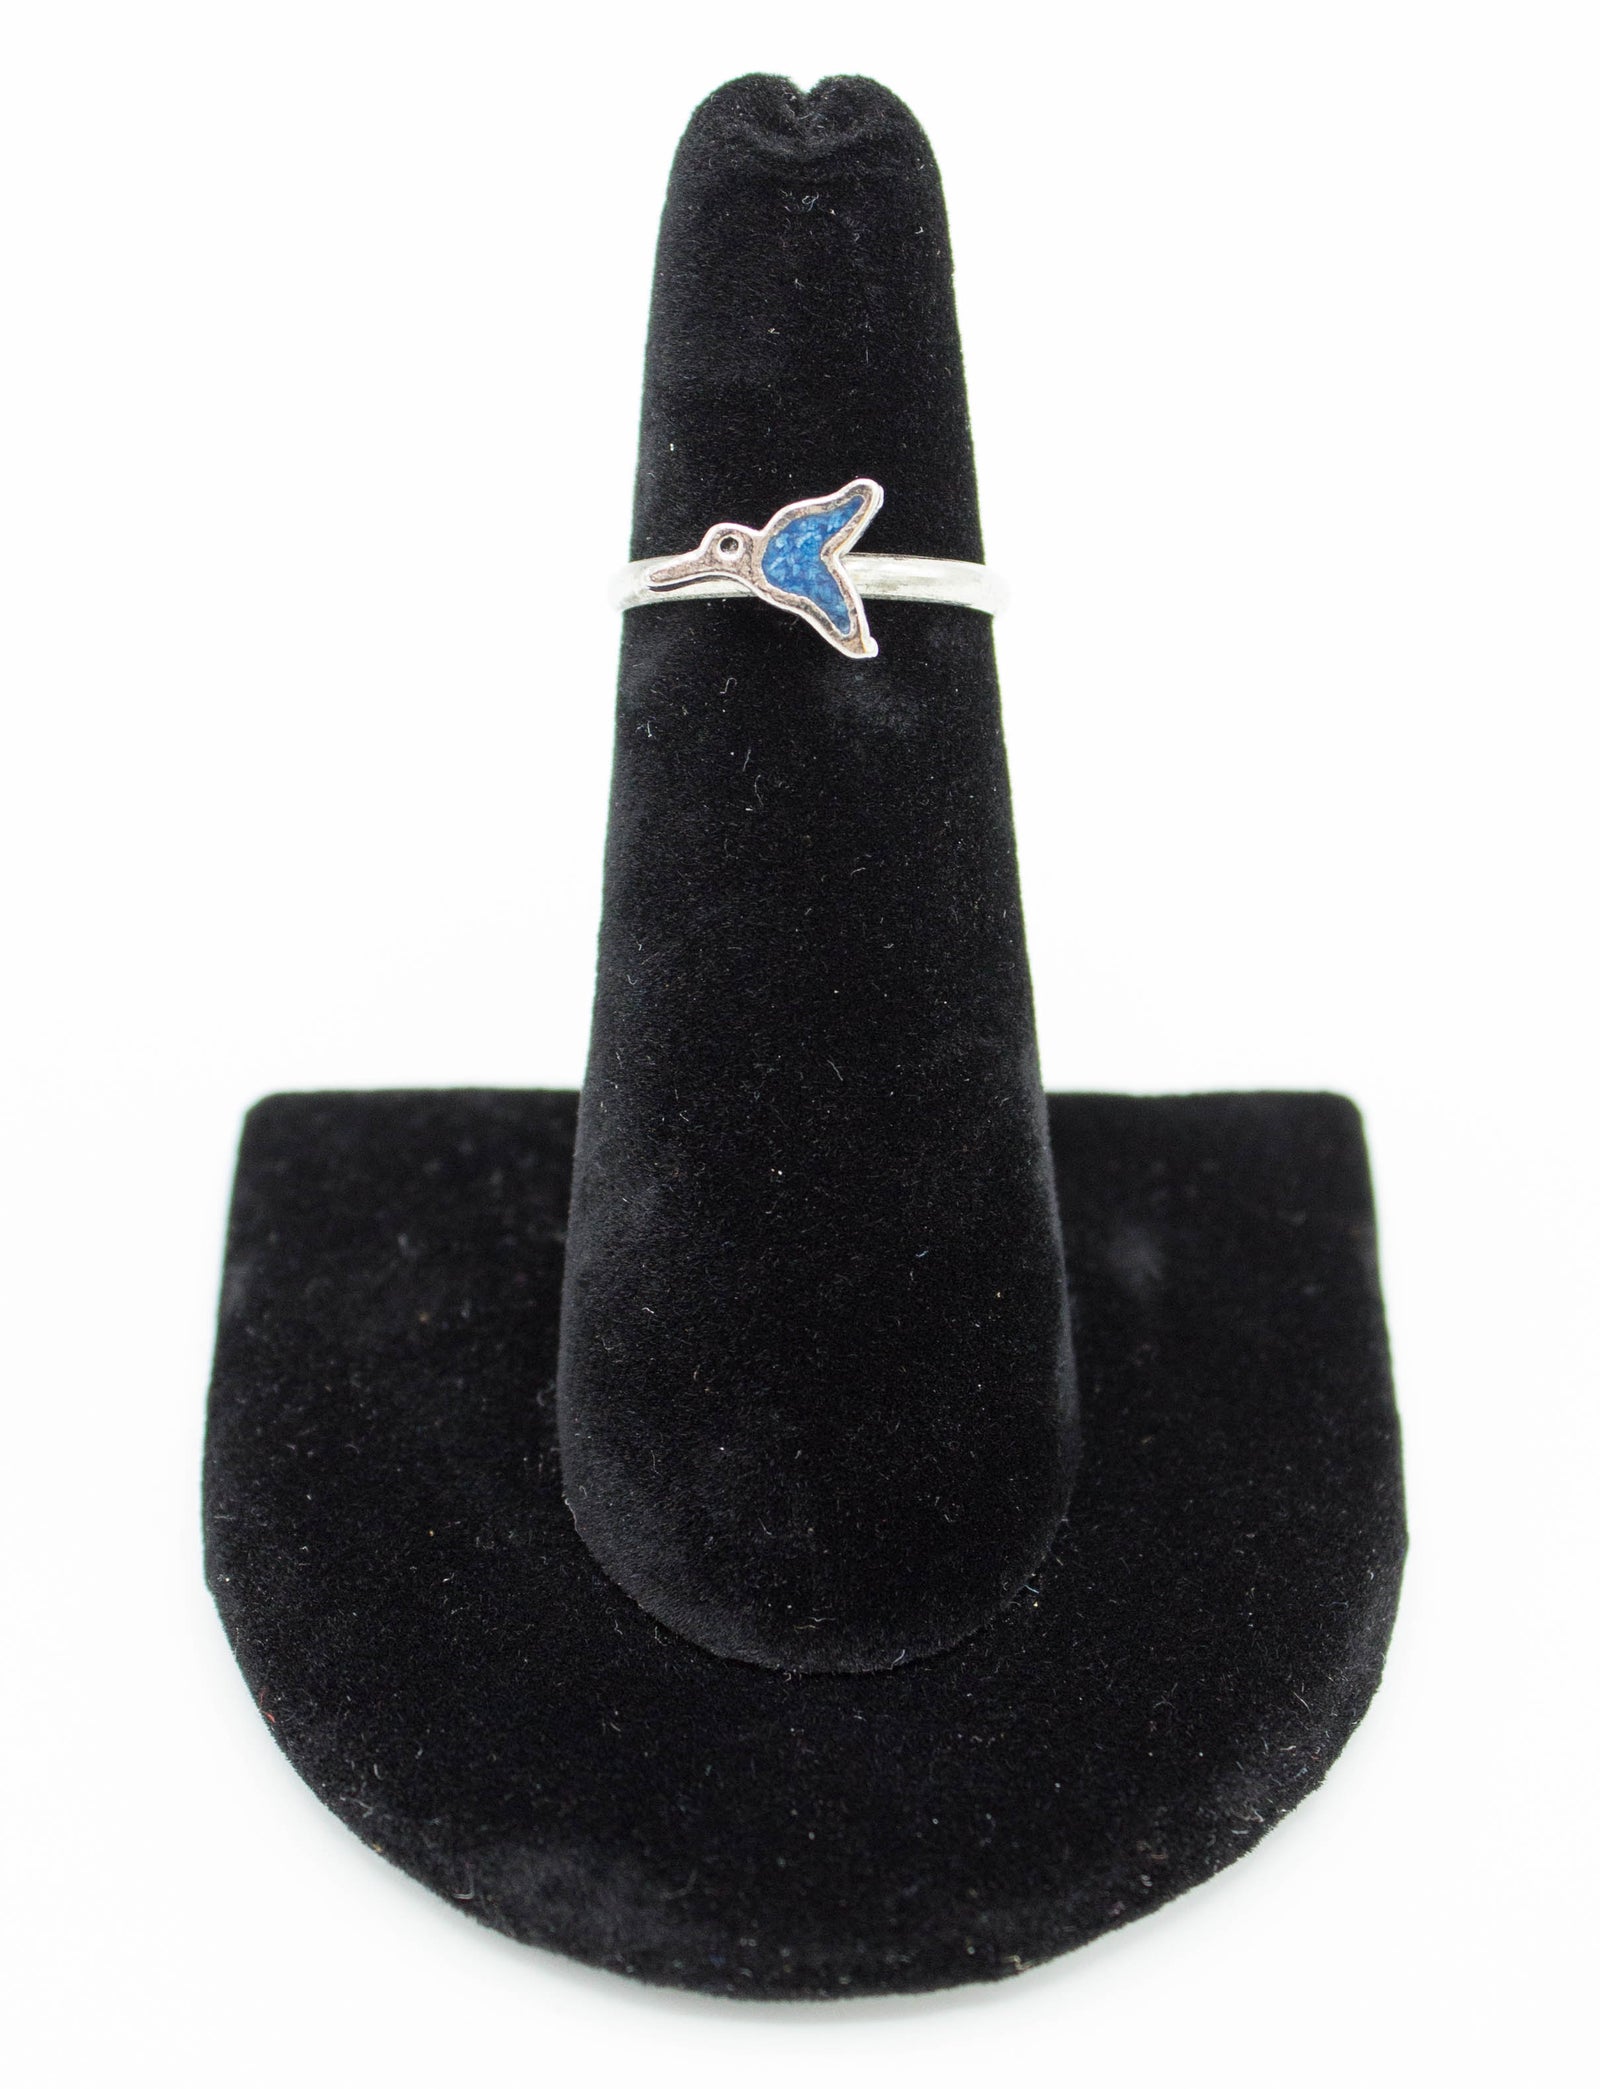 Vintage Sterling Silver and Turquoise Hummingbird Ring Size 5